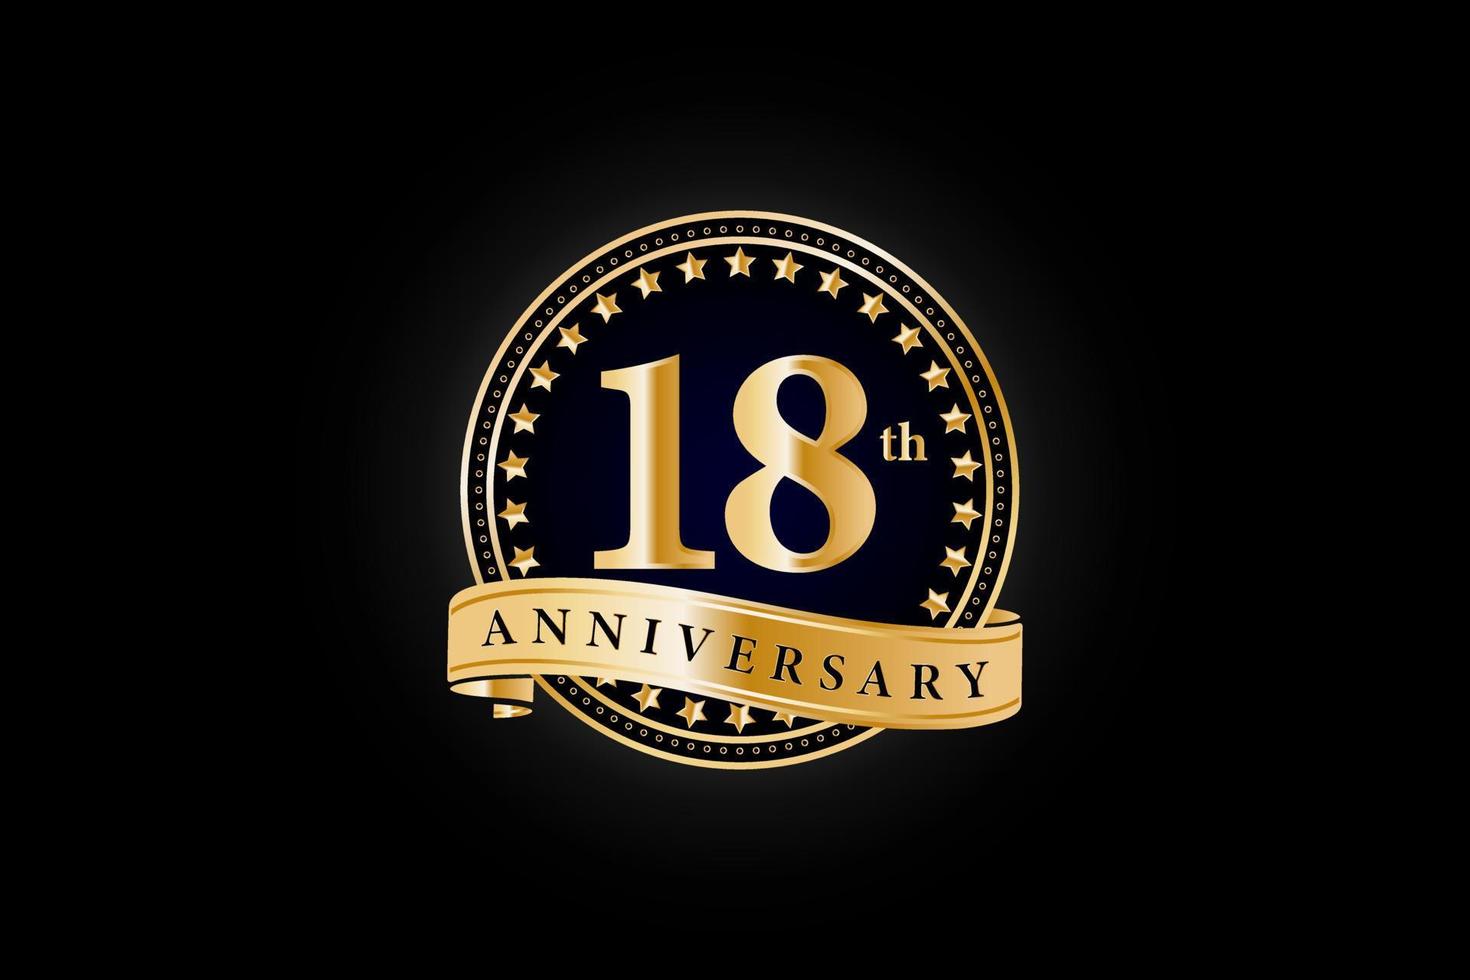 18th Anniversary golden gold logo with ring and gold ribbon isolated on black background, vector design for celebration.